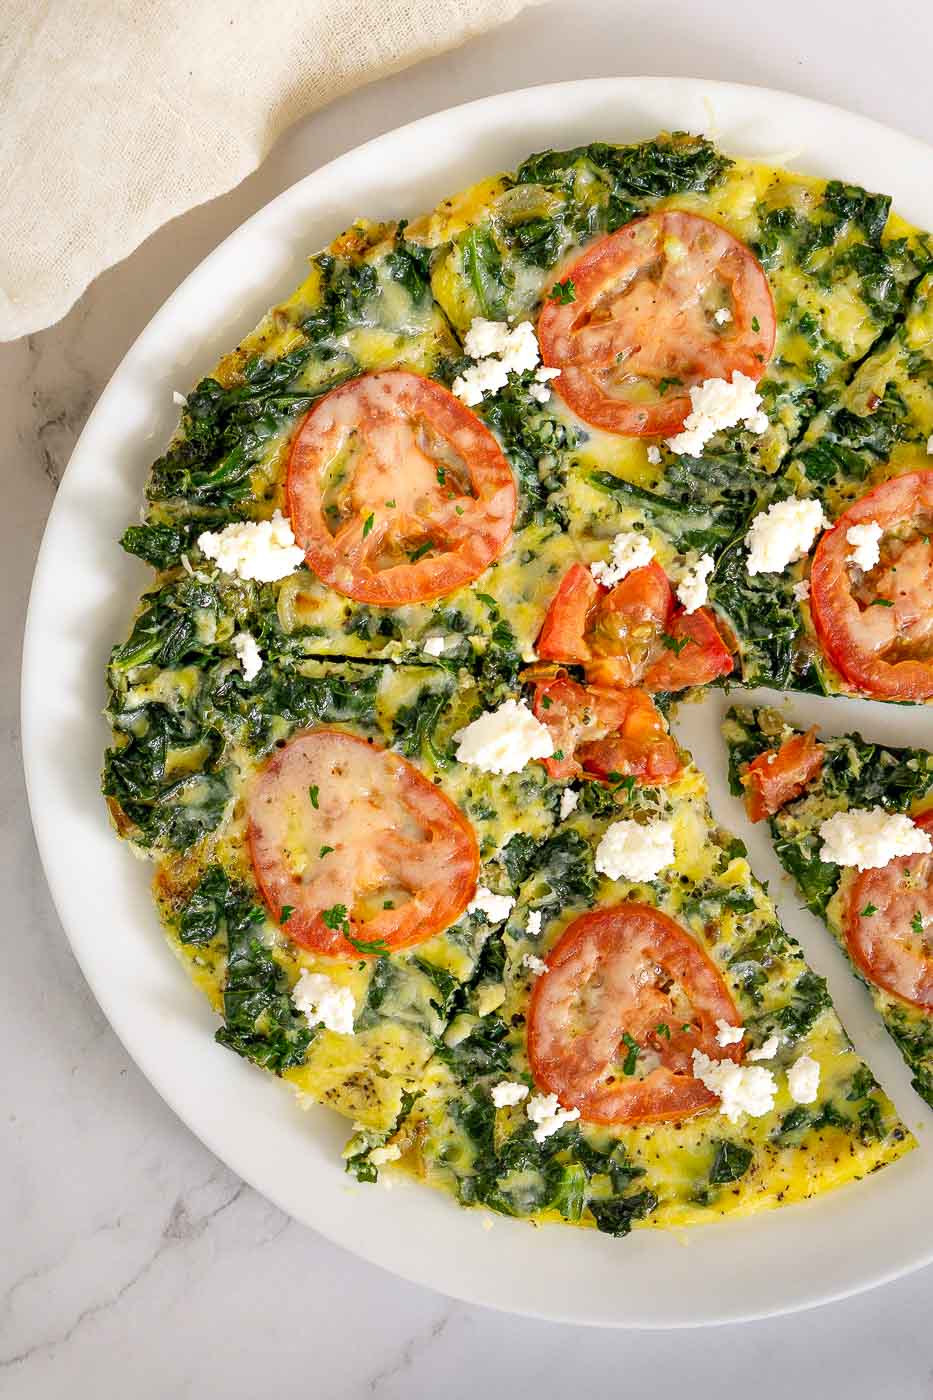 No bake frittata on a plate.